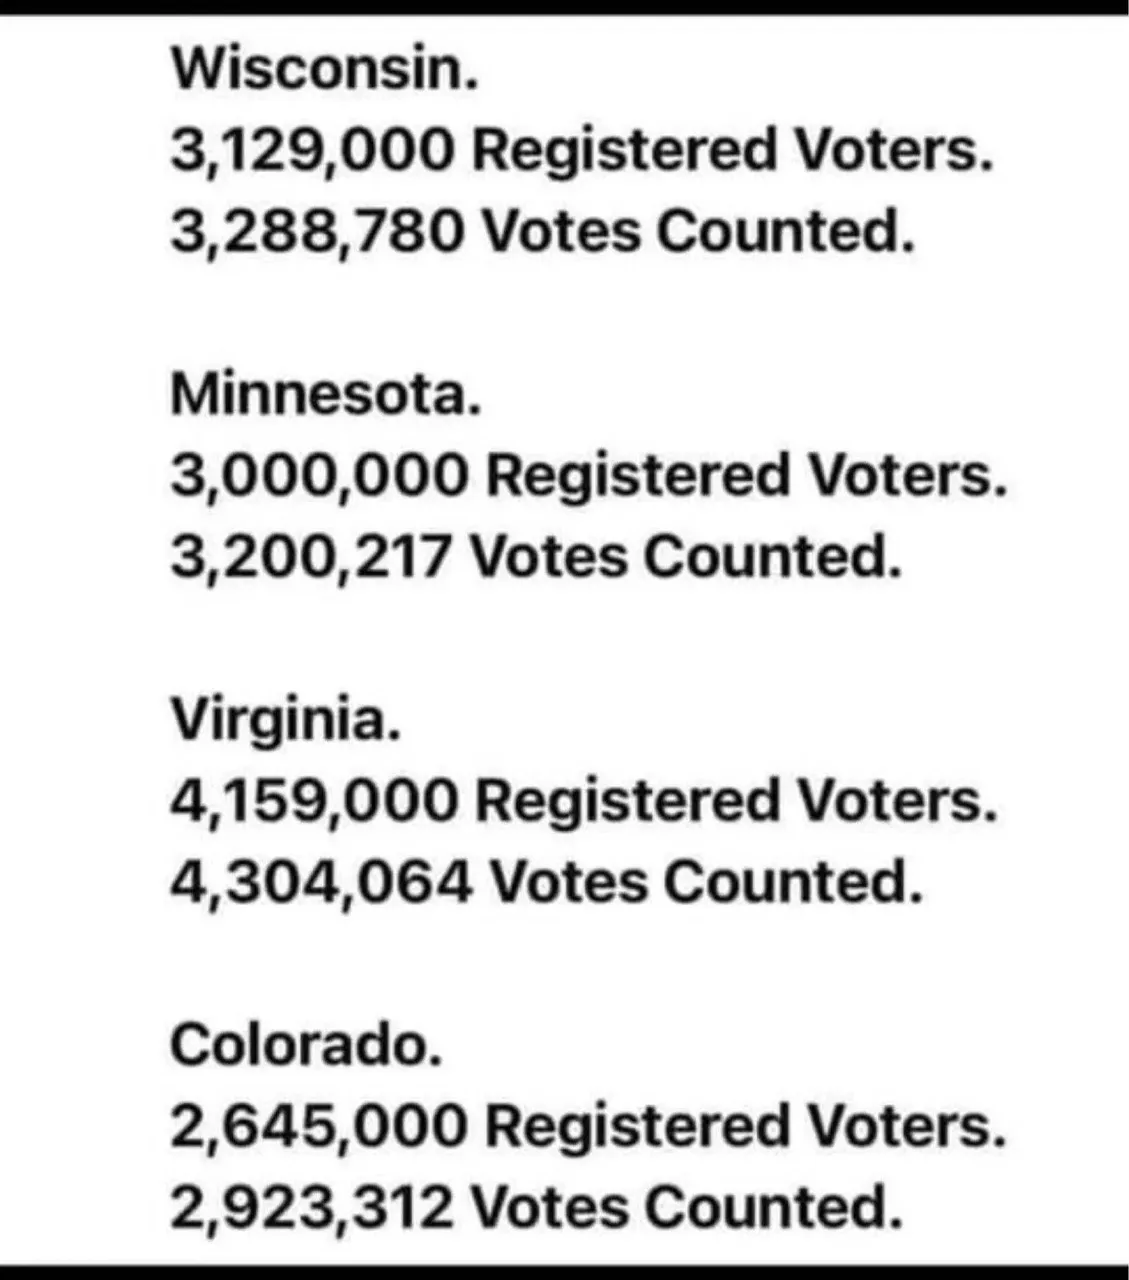 Registered vs Counted EmCdWtbXIAA5A-g.jpeg